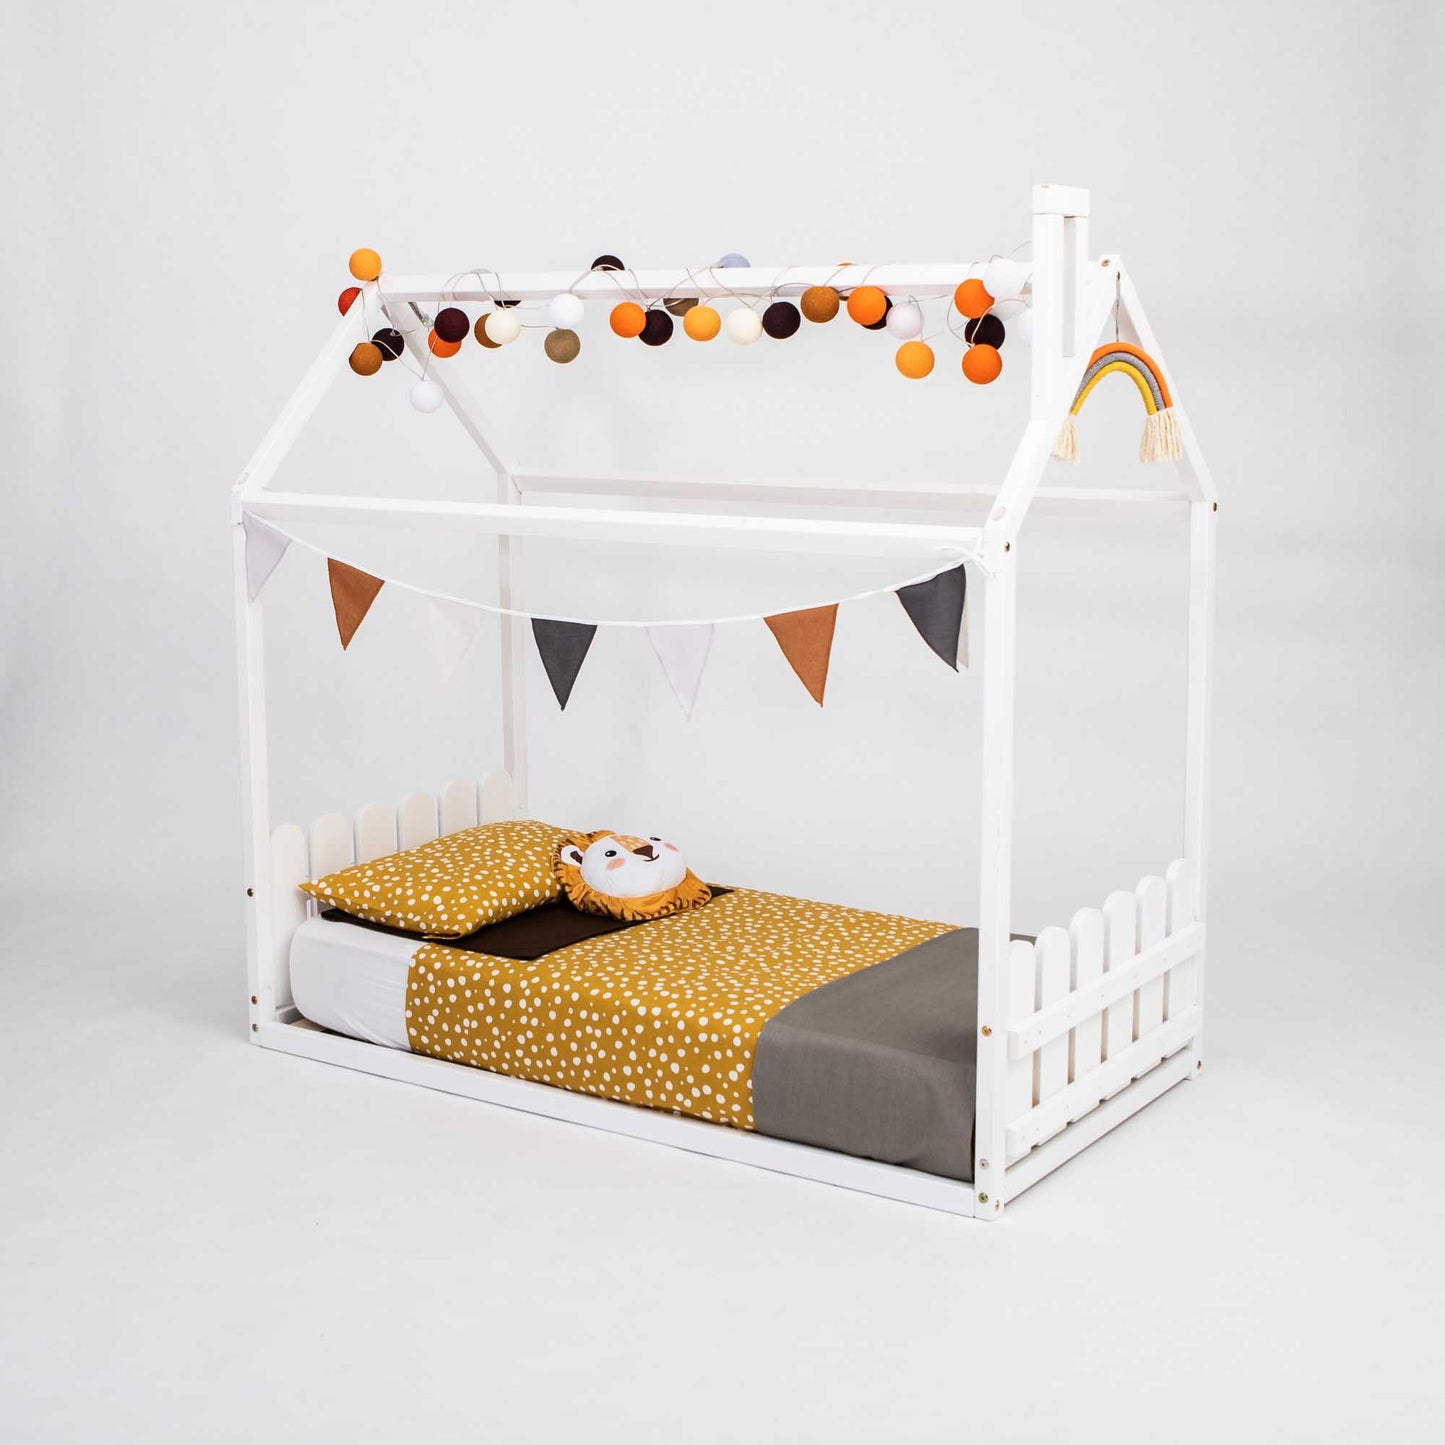 A low platform Montessori house-frame bed with a picket fence headboard and footboard, perfect as a montessori house bed for toddlers.